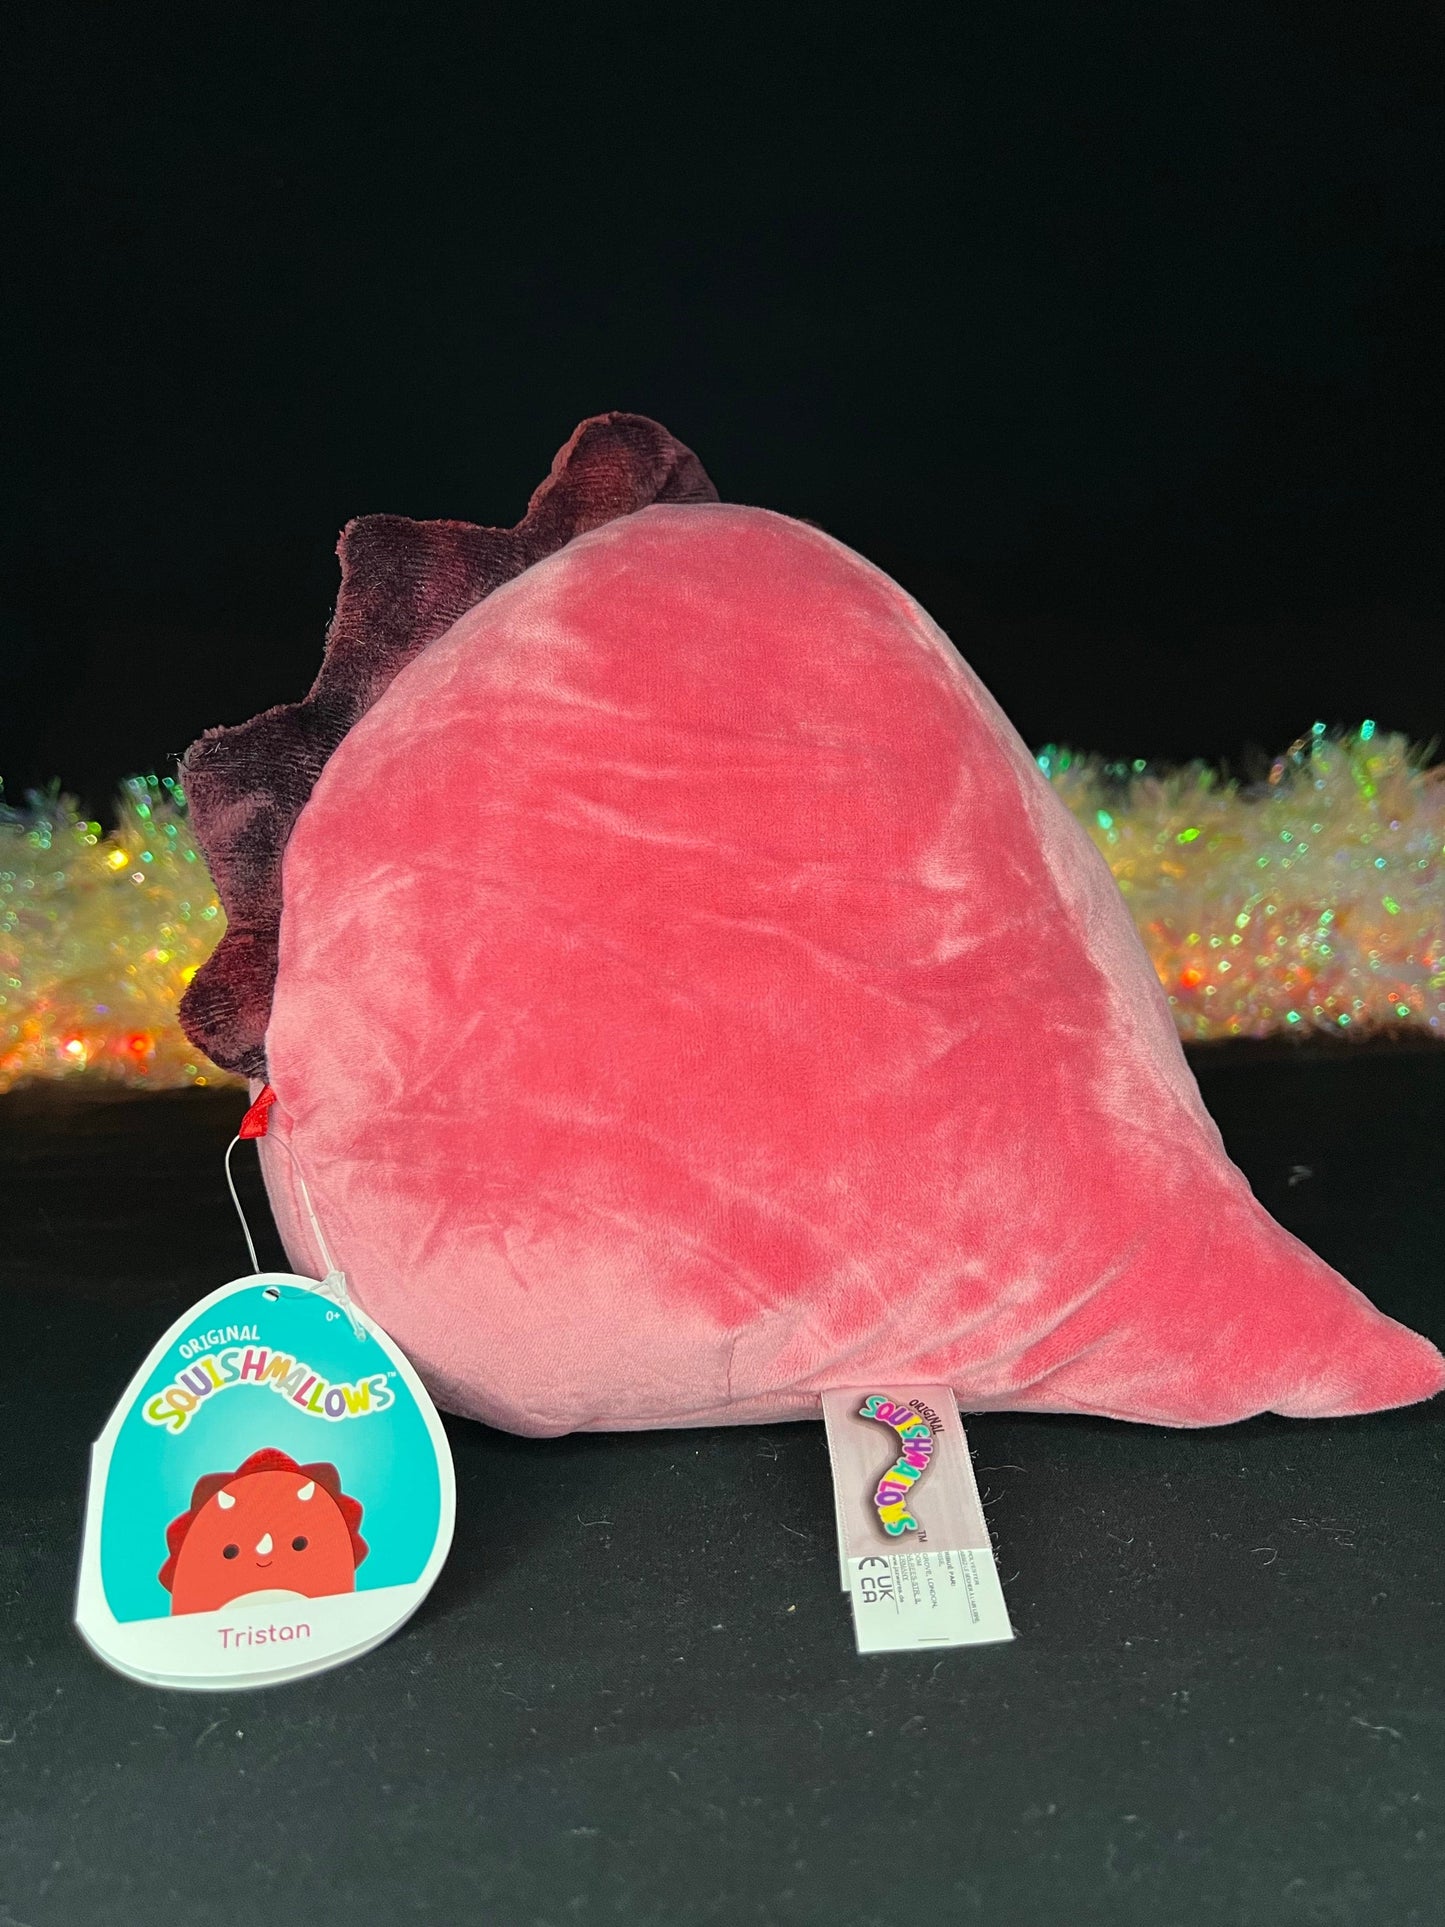 Squishmallow 8” Tristan the Red Triceratops Plush | Sweet Magnolia Charms.